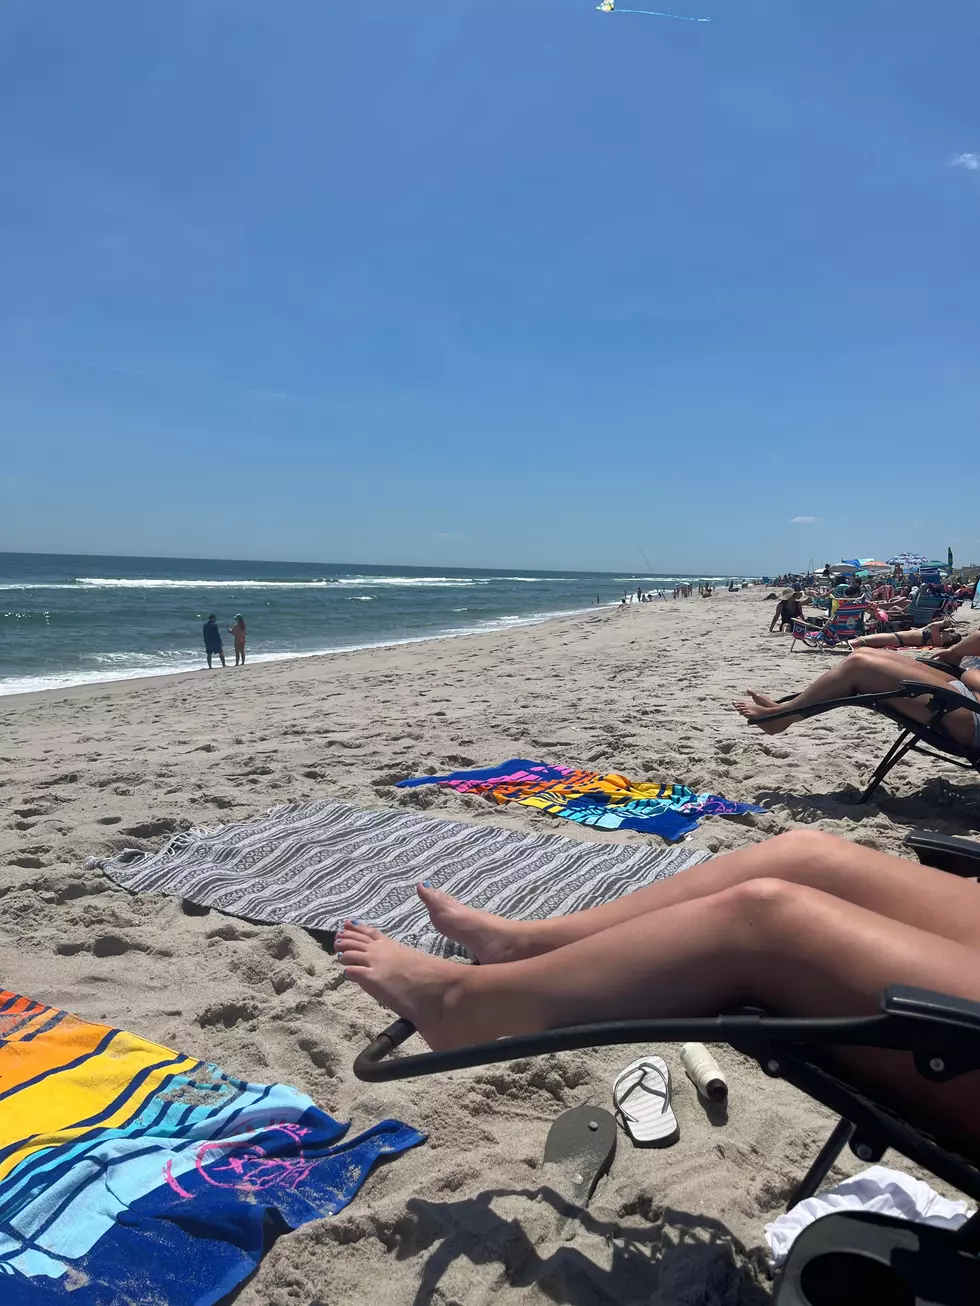 Should Jersey Shore Residents Be Given Free Beach Access?